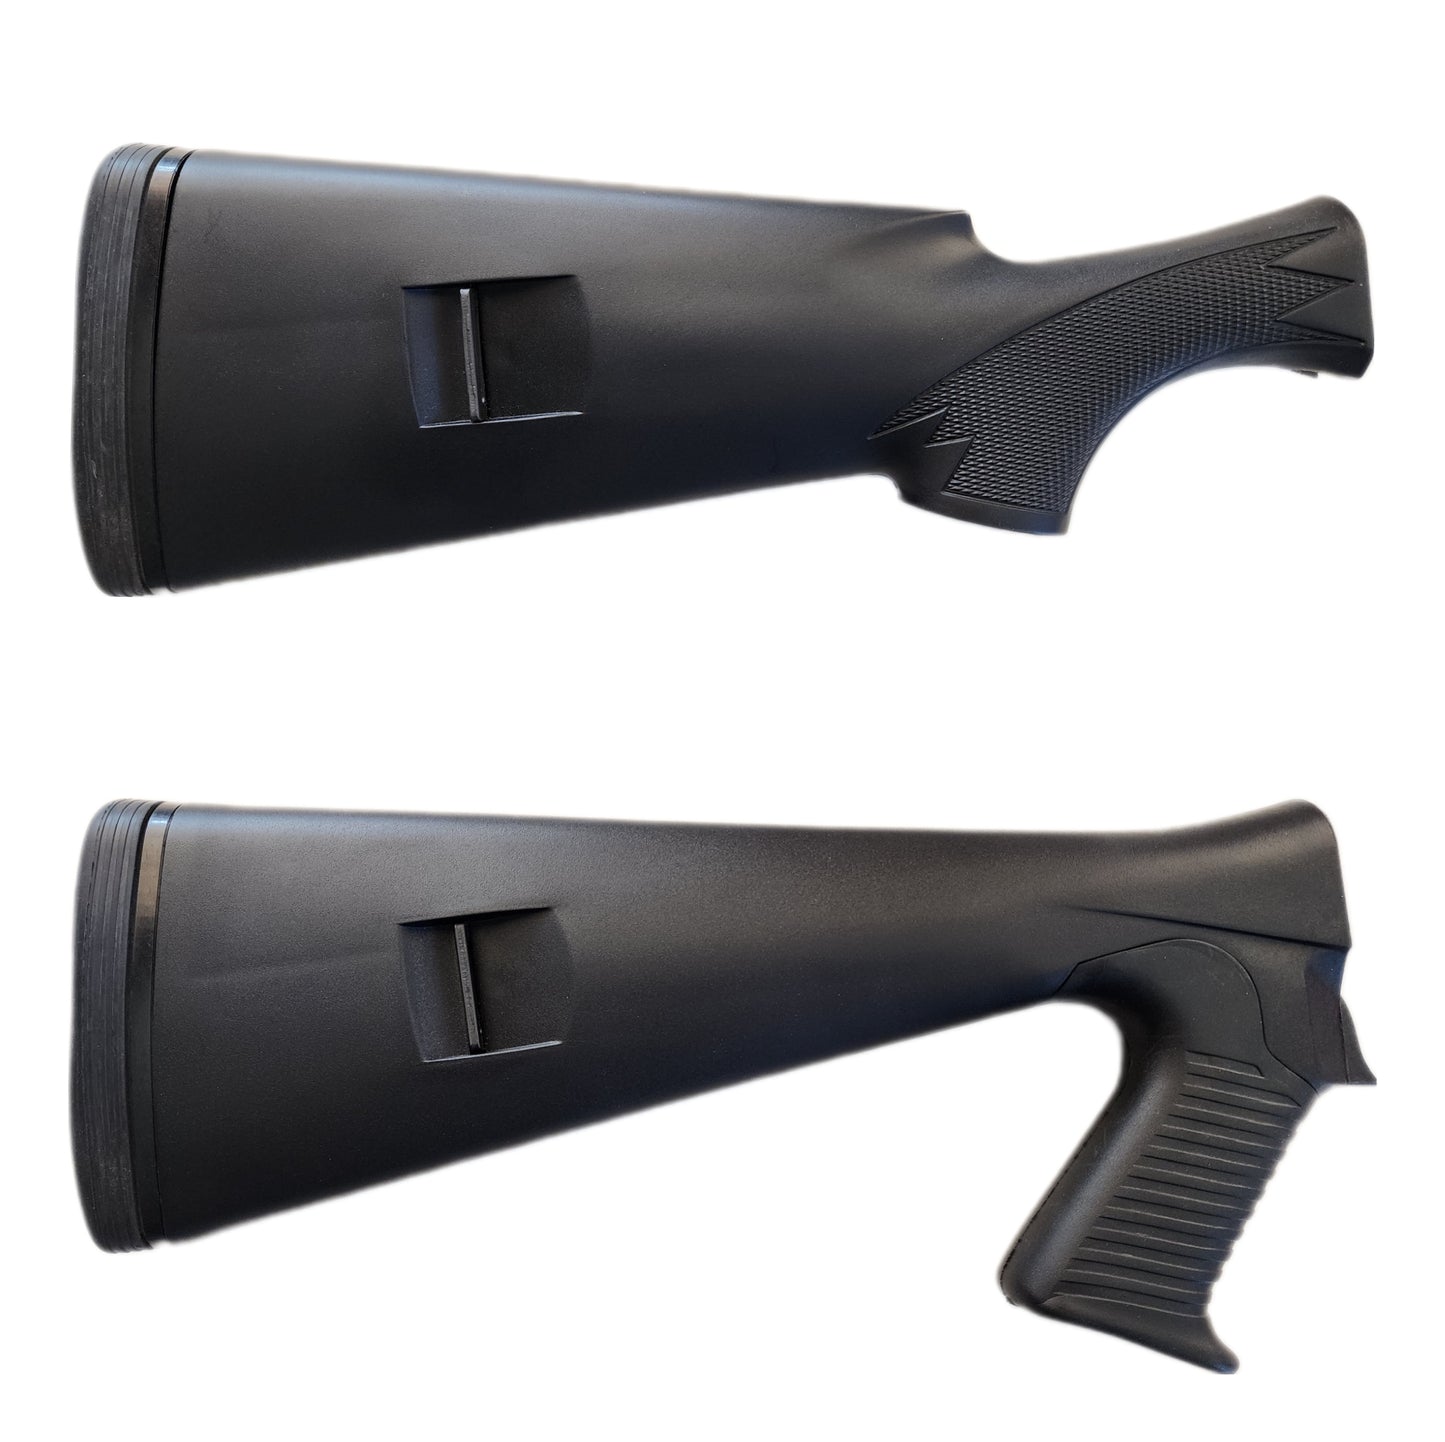 Benelli M4 Recoil Pad on Polymer Stocks Side